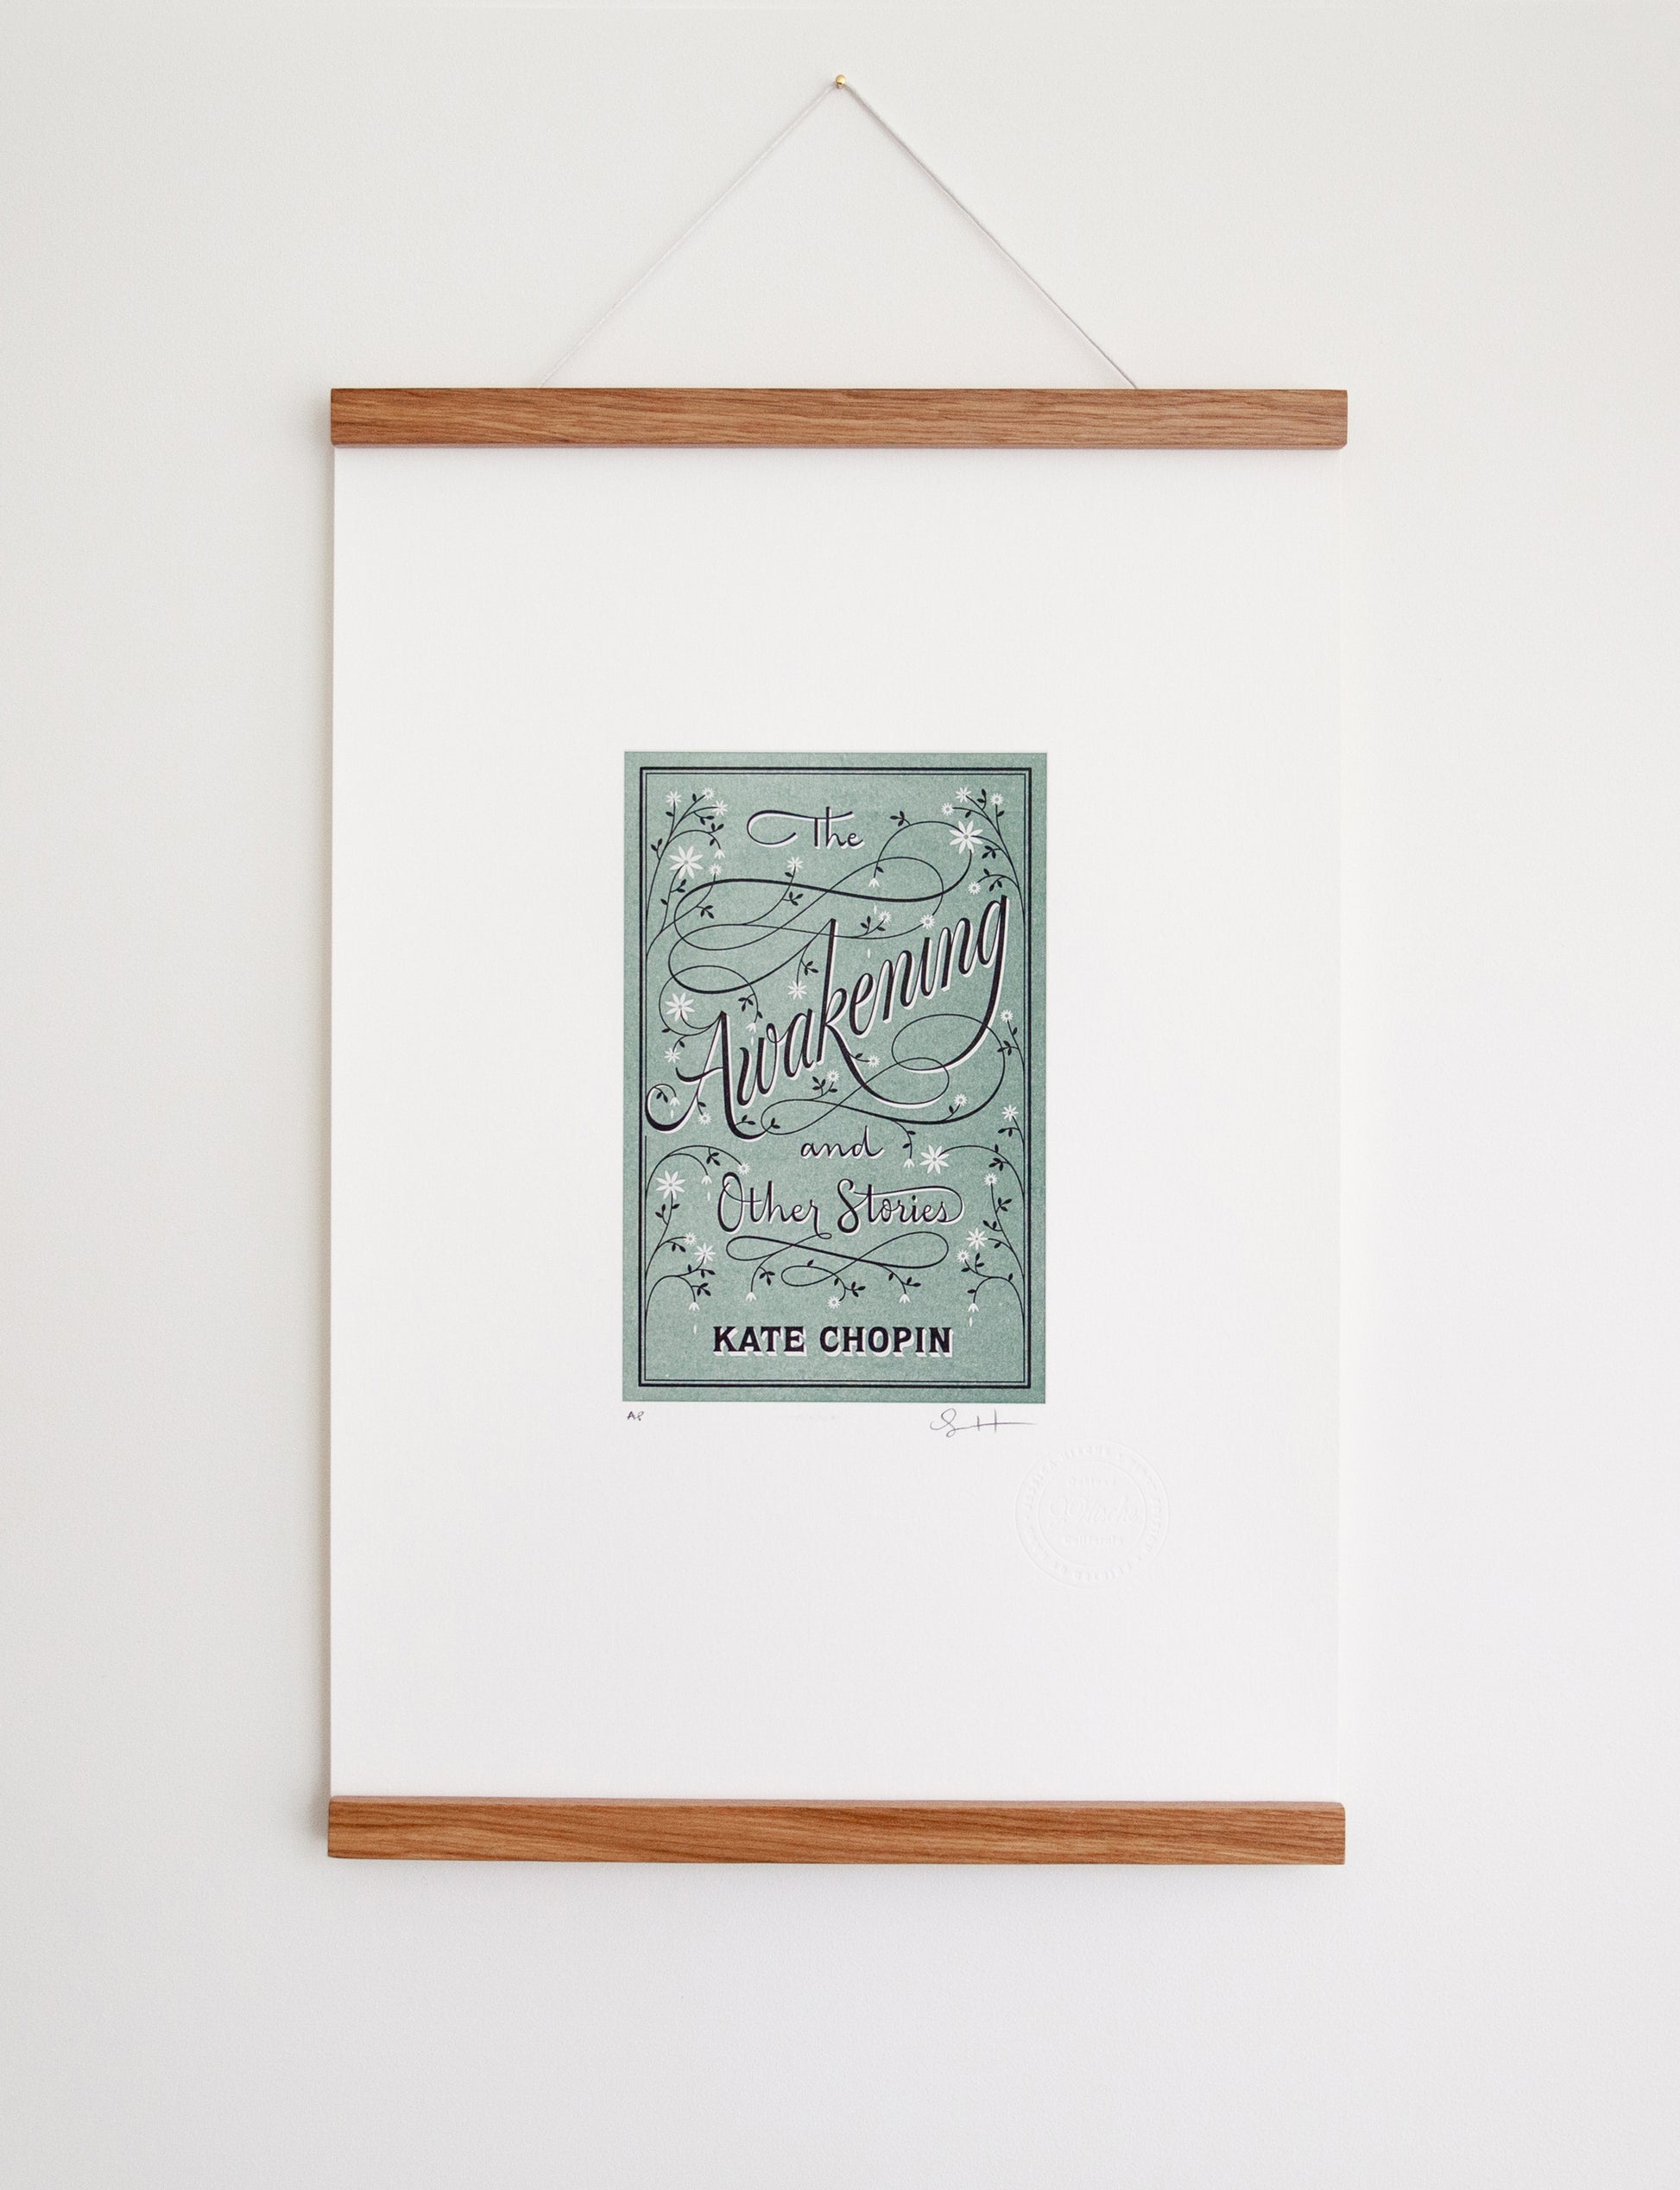 Framed 2-color letterpress print in green and black. Printed artwork is an illustrated book cover of The Adventures of The Awakening including custom hand lettering.